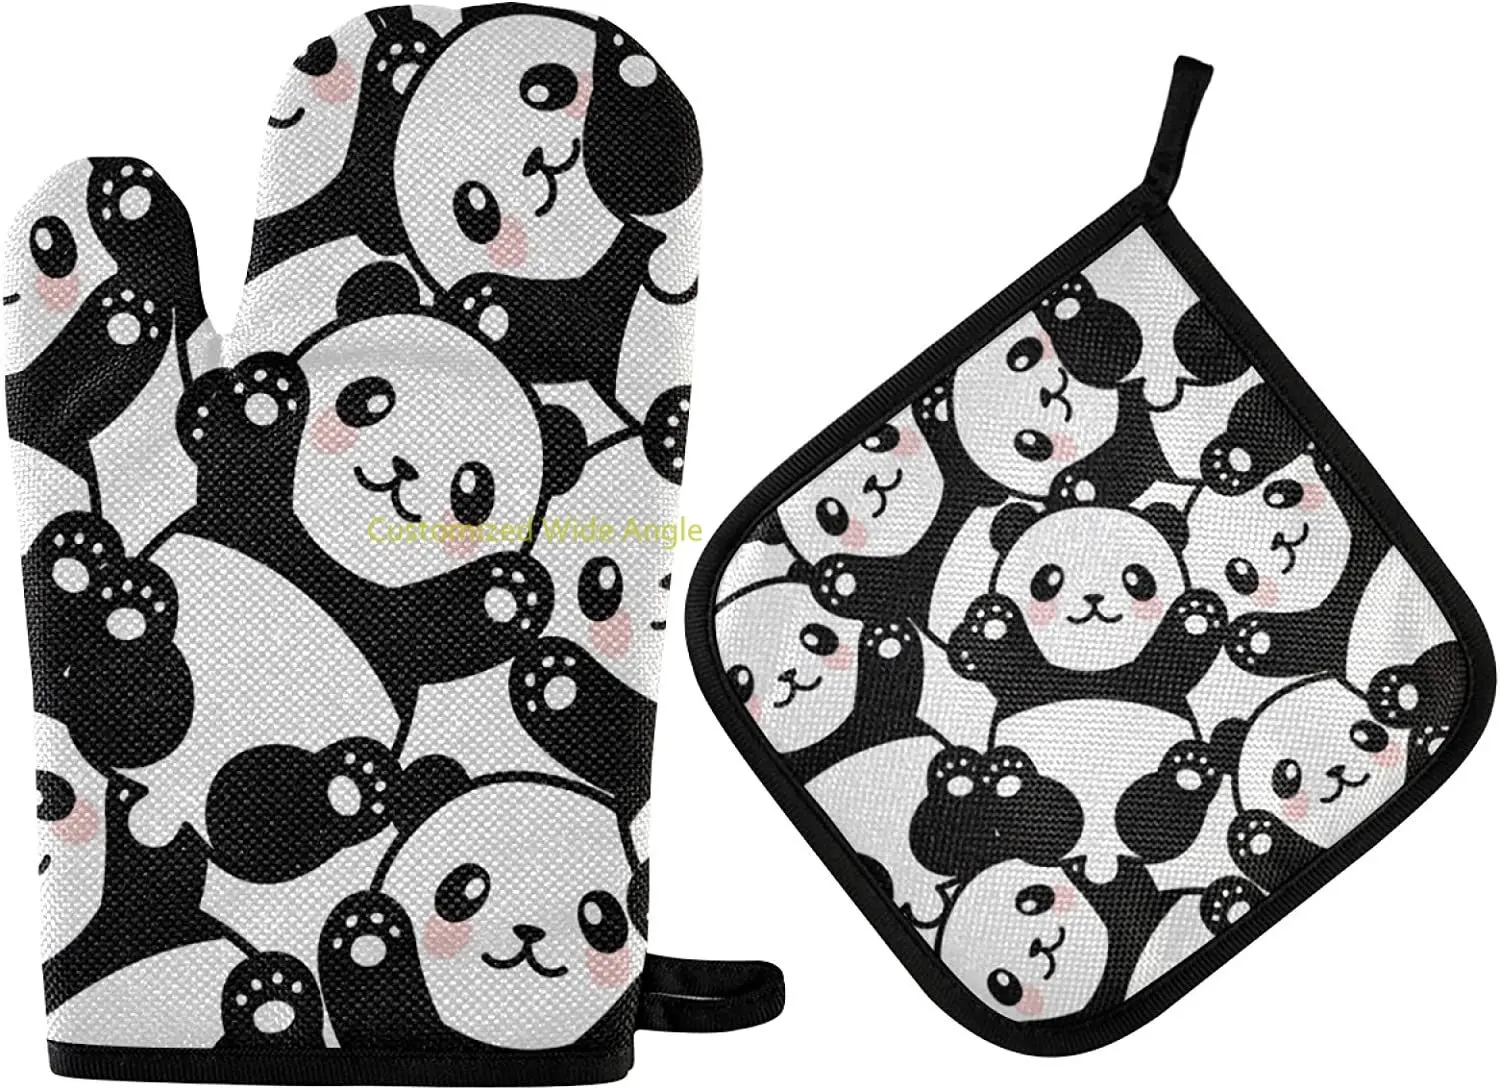 

Cute Pandas Oven Mitts and Pot Holders Insulated Gloves & Kitchen Counter Safe Mats for Cooking BBQ Baking Grilling